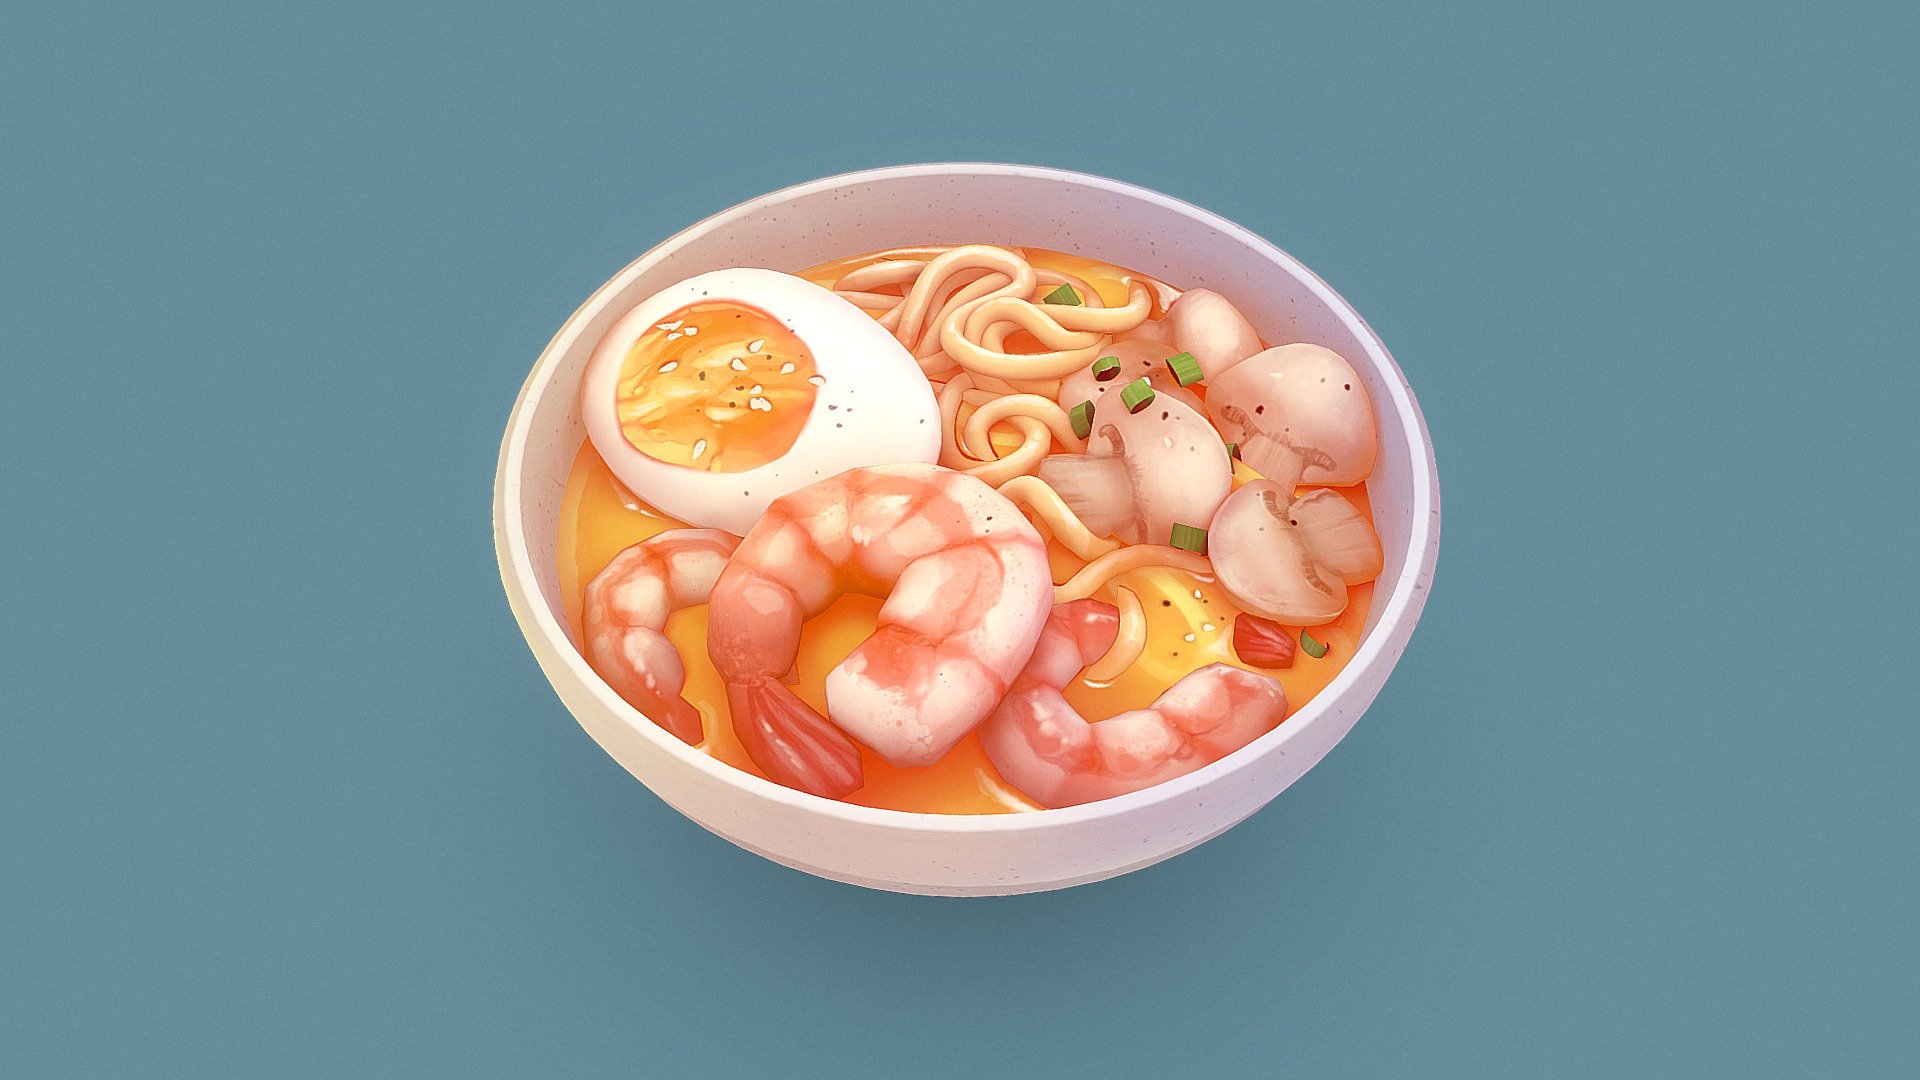 Still painting food !  

Made with Blender and Substance Painter ~ - Ramen ~ - 3D model by DetectivePacha (@S.Pacha) 3d model